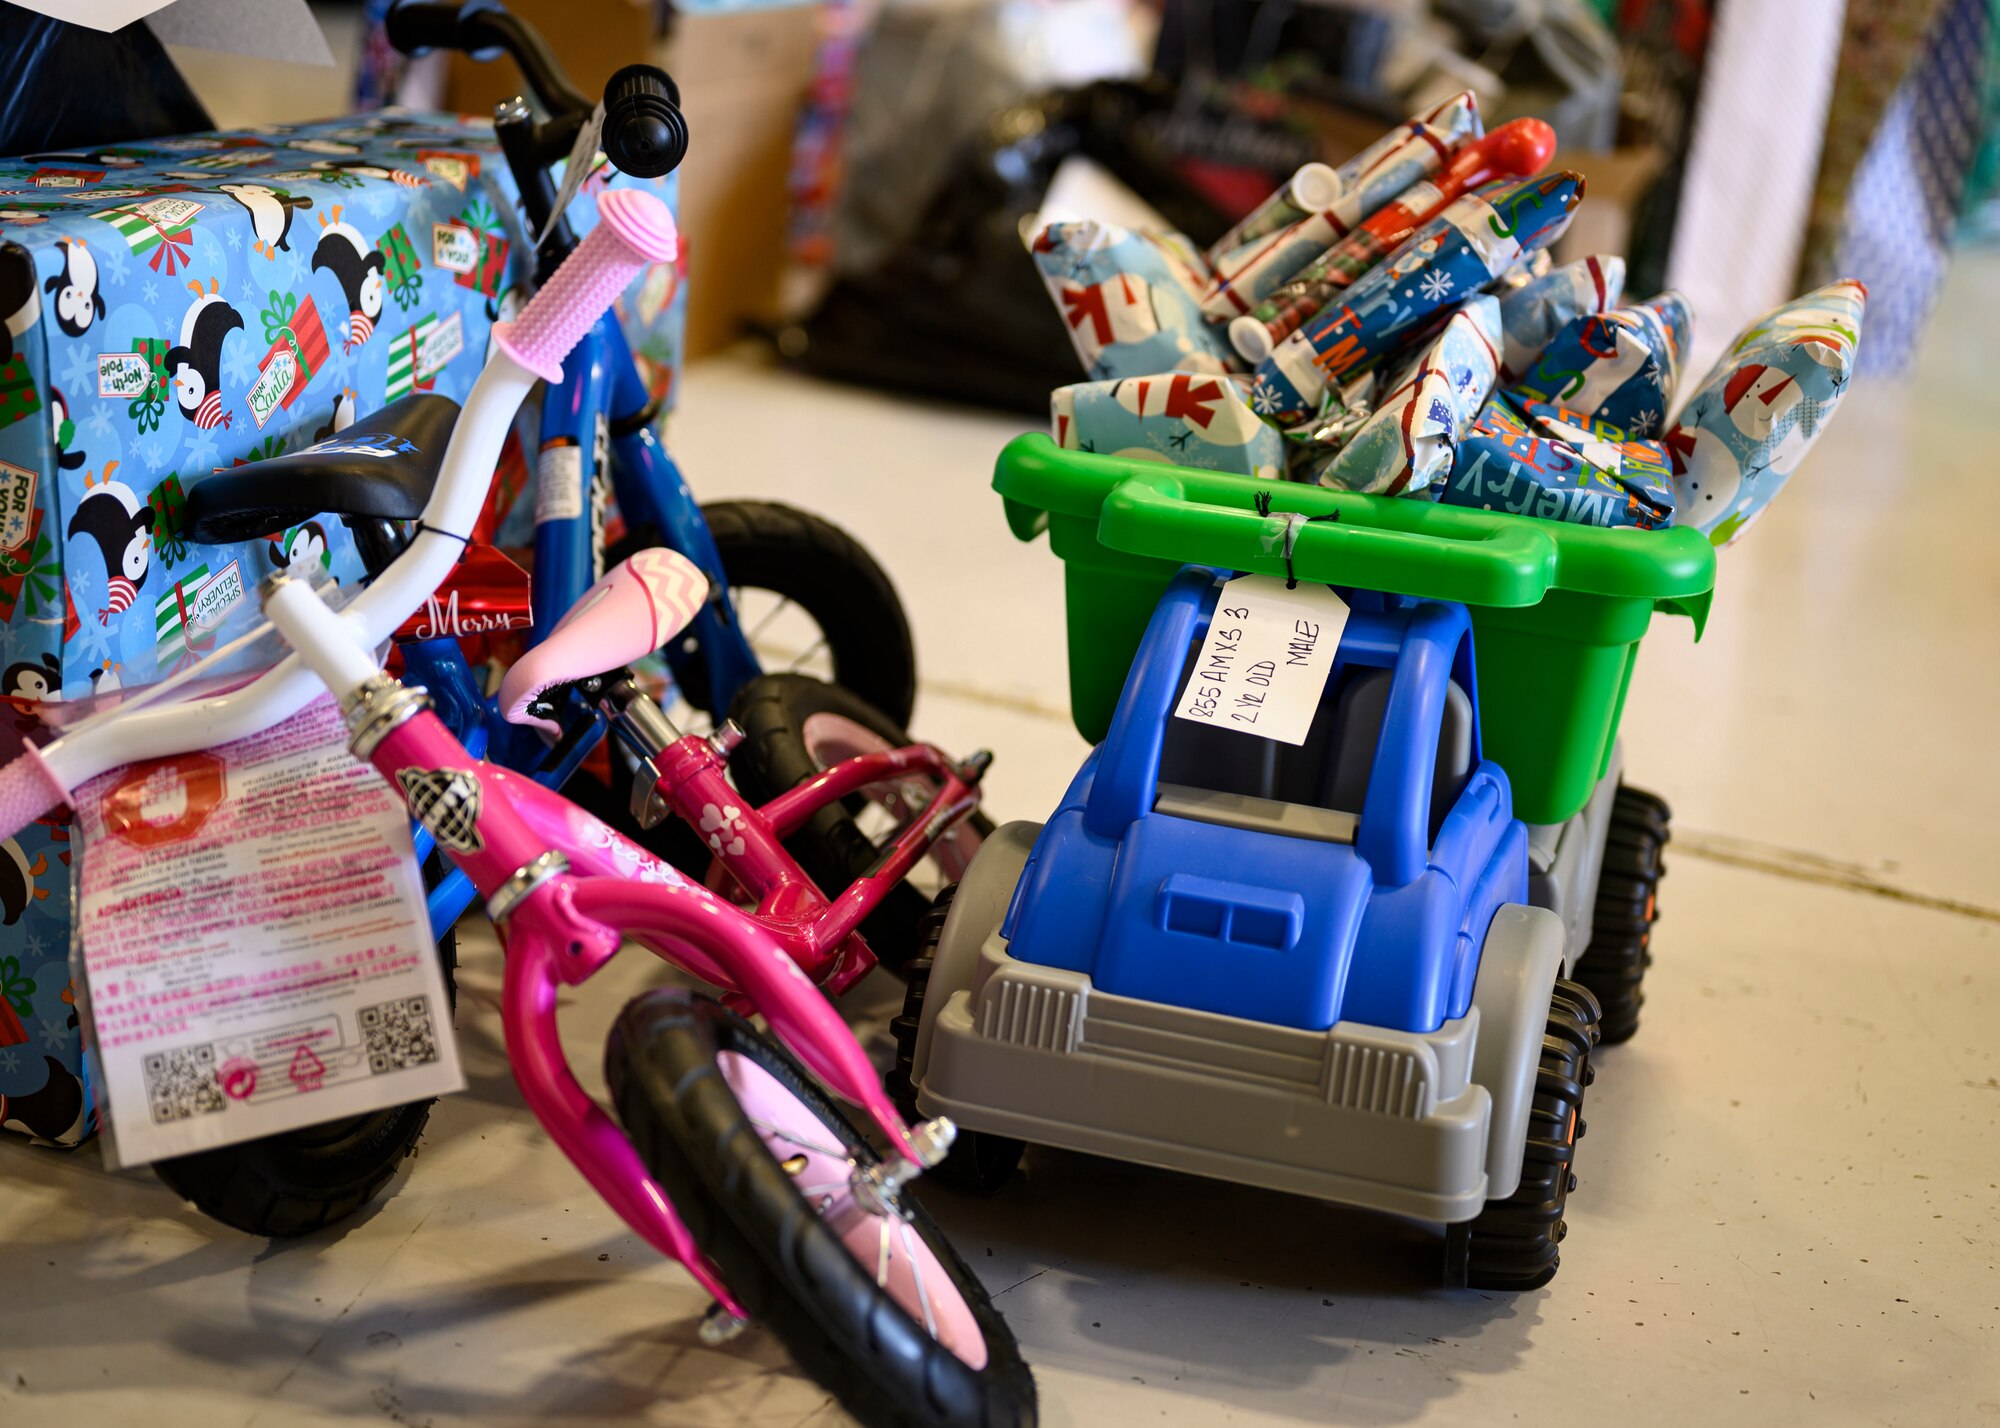 a pink bike and blue toy dump truck loaded with wrapped gifts